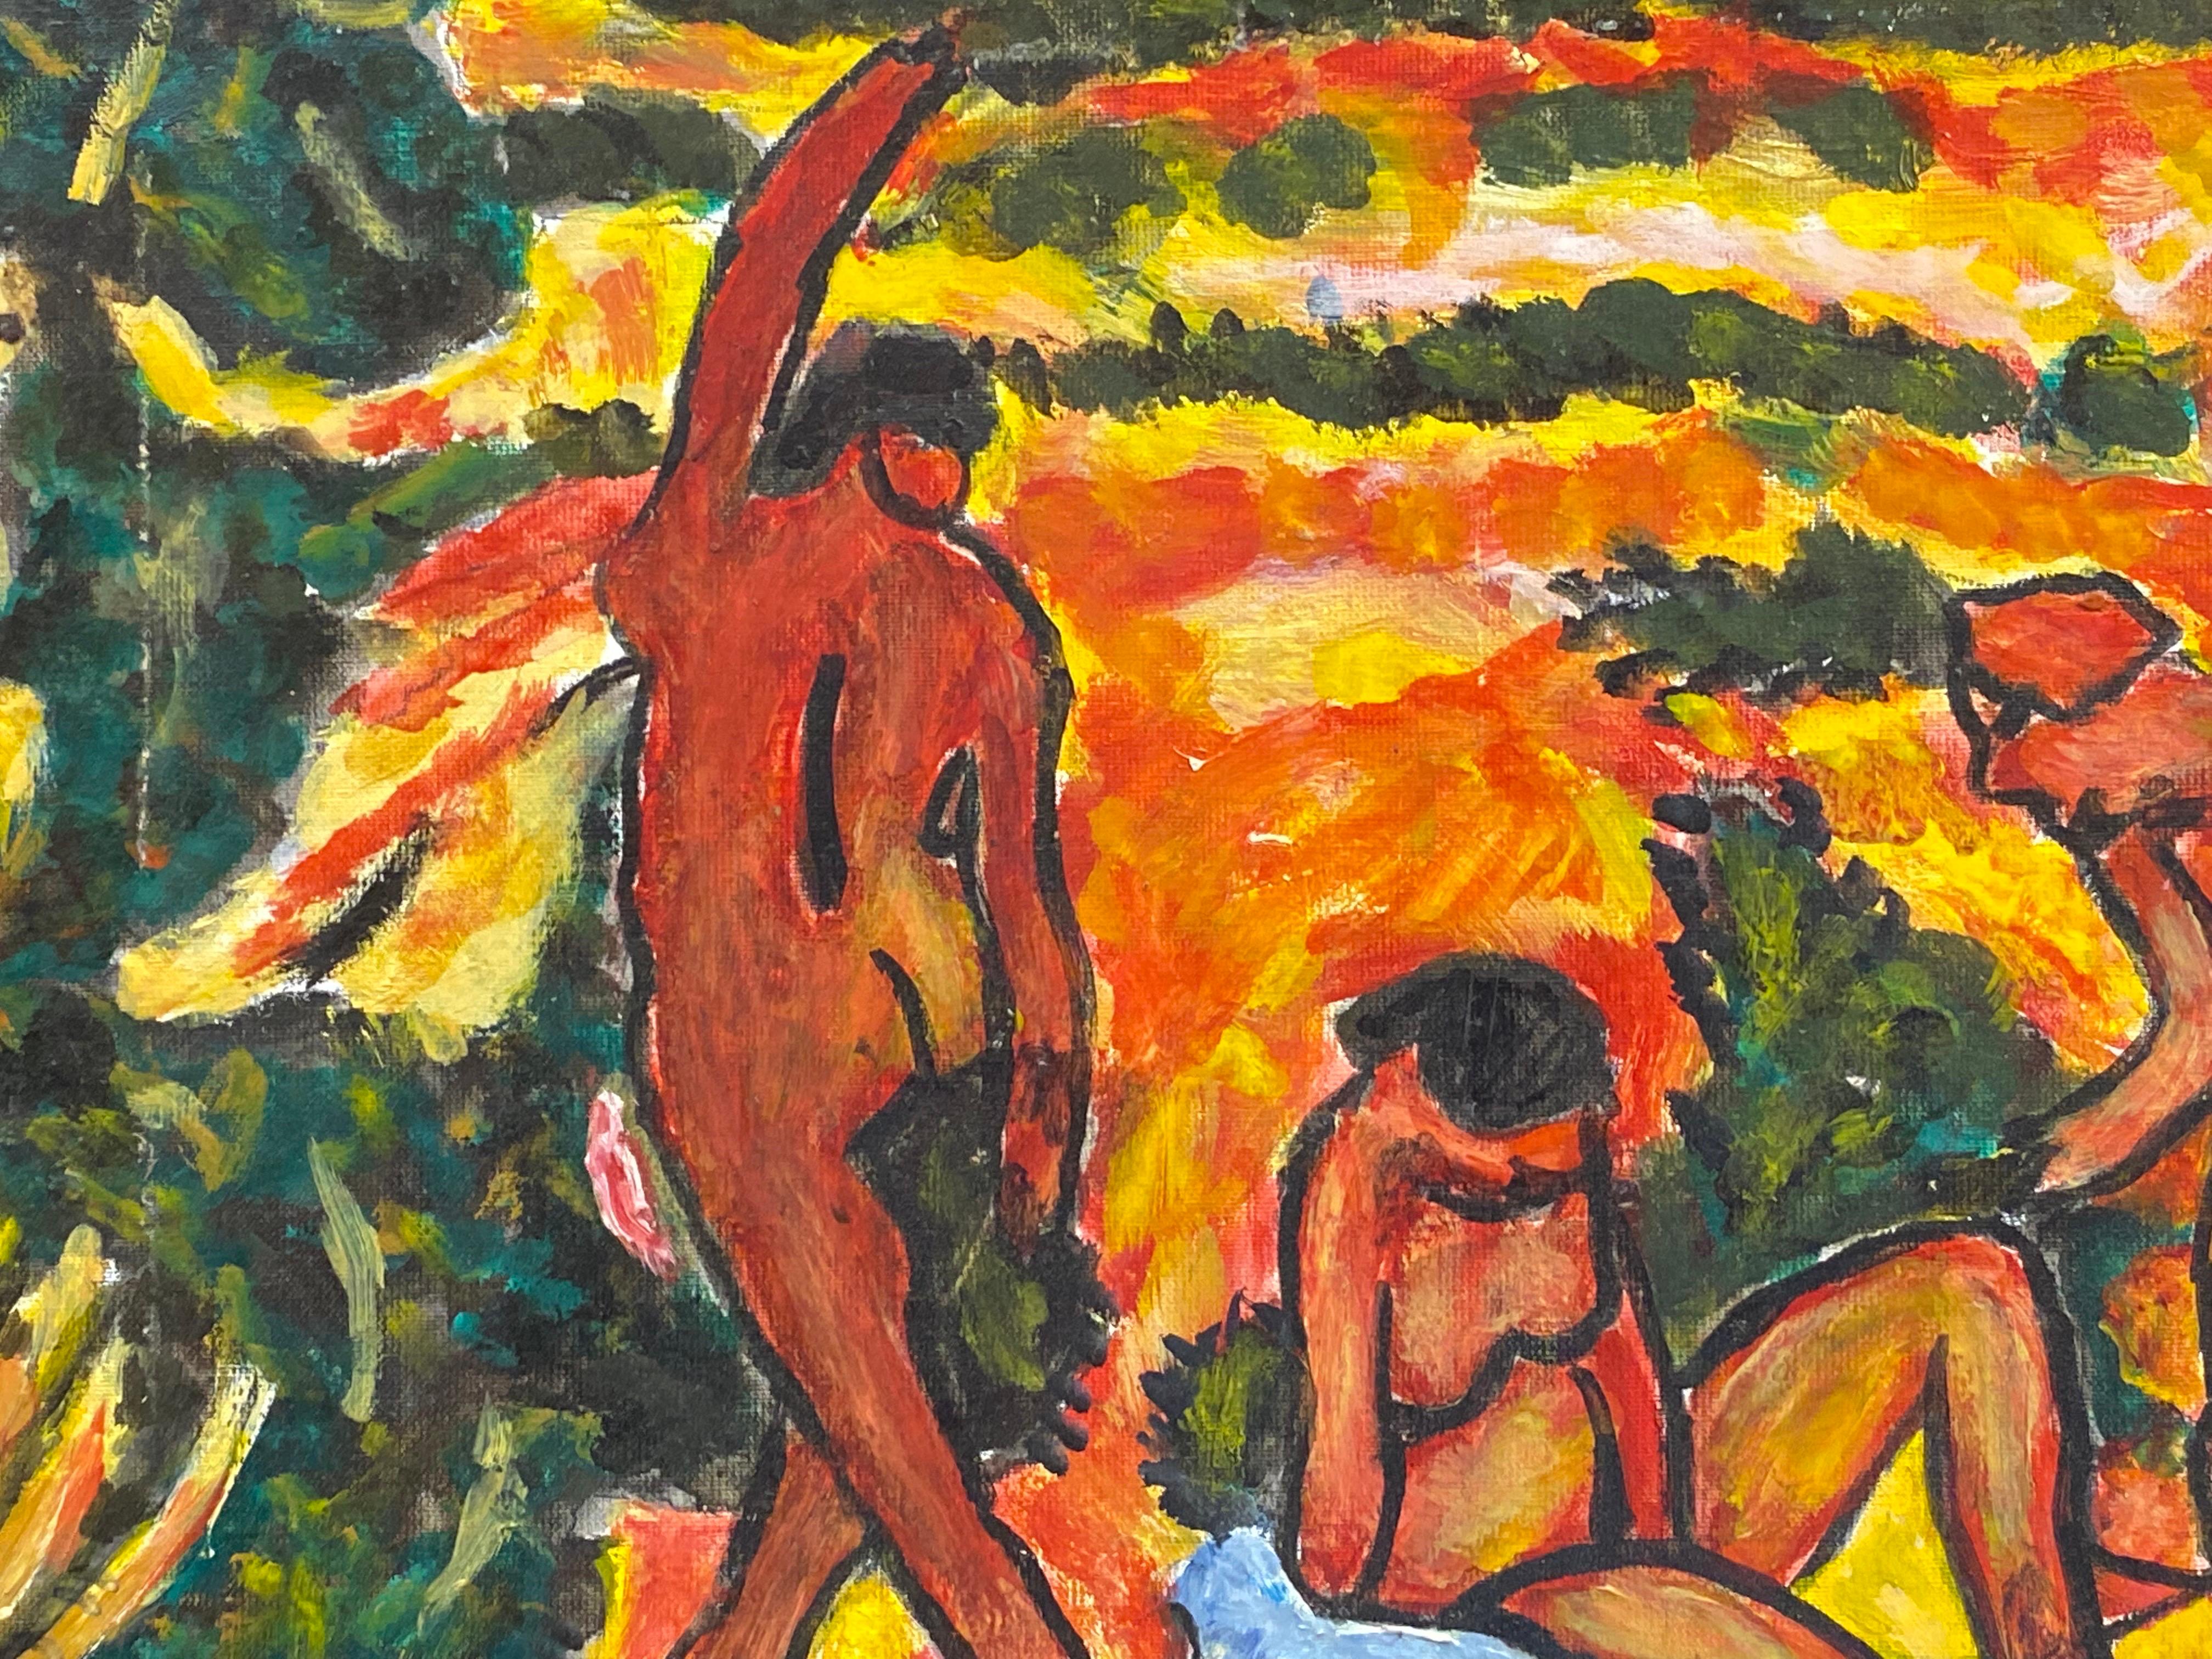 Artist/ School: French Fauvist school, after Max Pechstein

Title: Nudes in Landscape

Medium: oil painting on board, unframed

board: 15 x 18 inches

Provenance: private collection, France

Condition: The painting is in overall very good and sound